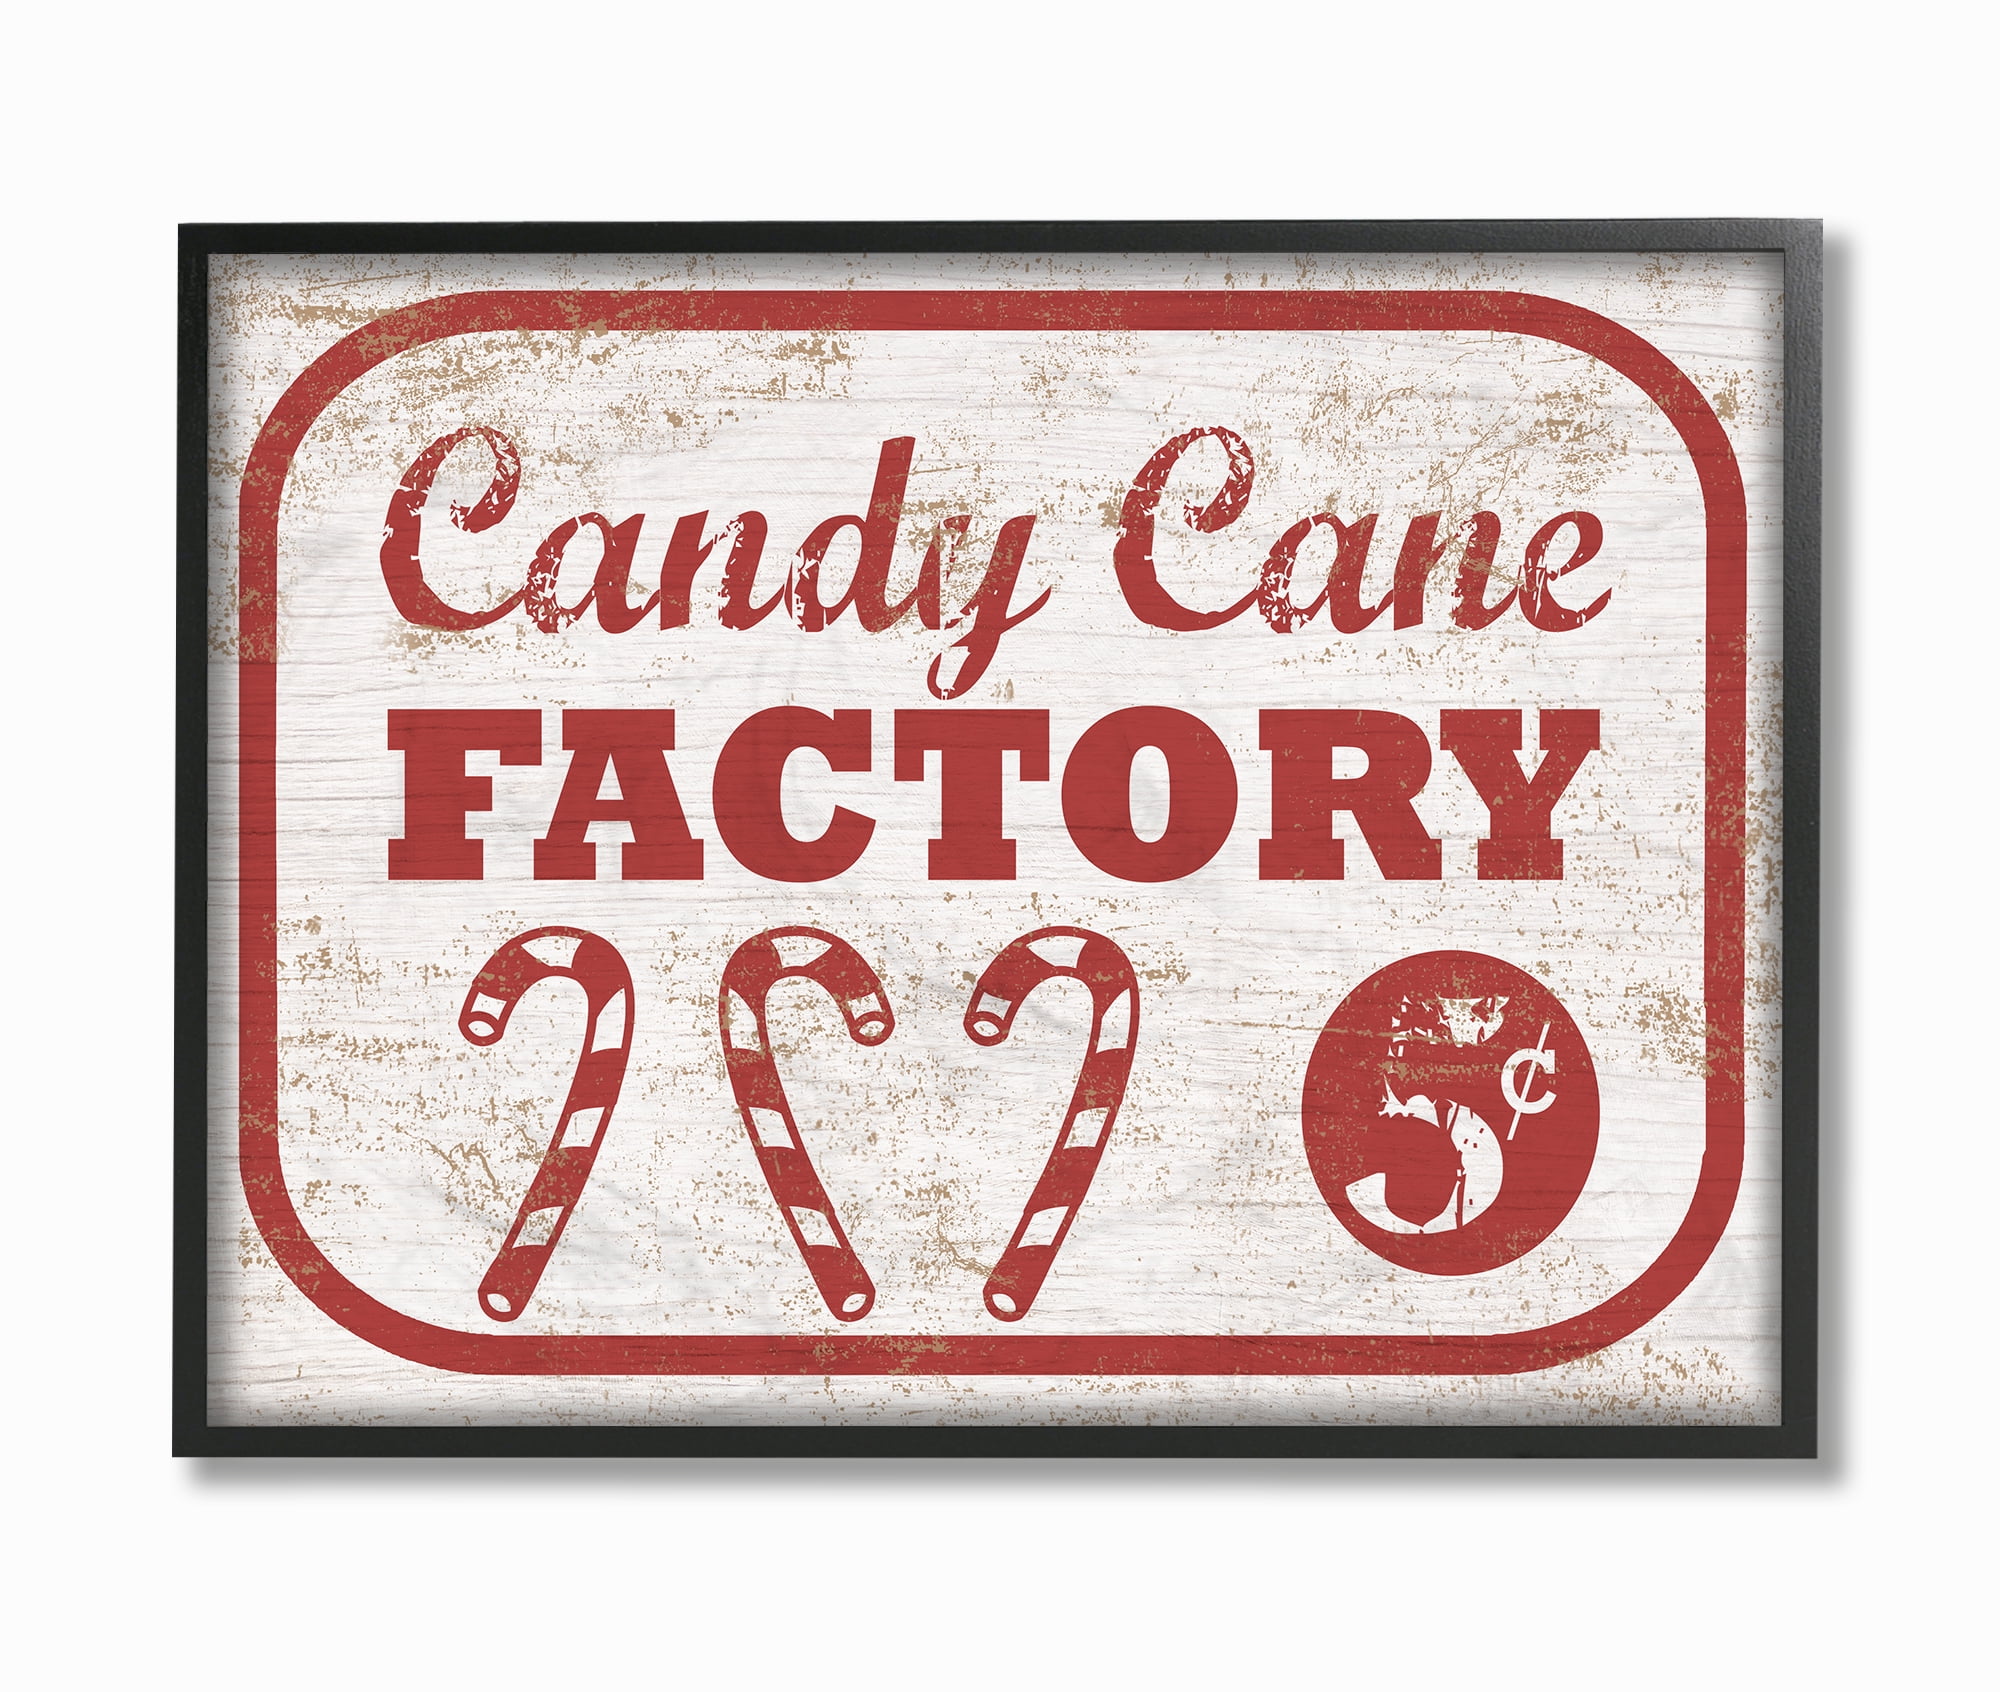 16 x 20 The Stupell Home Décor Collection Candy Cane Factory Vintage Sign Oversized Framed Giclee Texturized Art